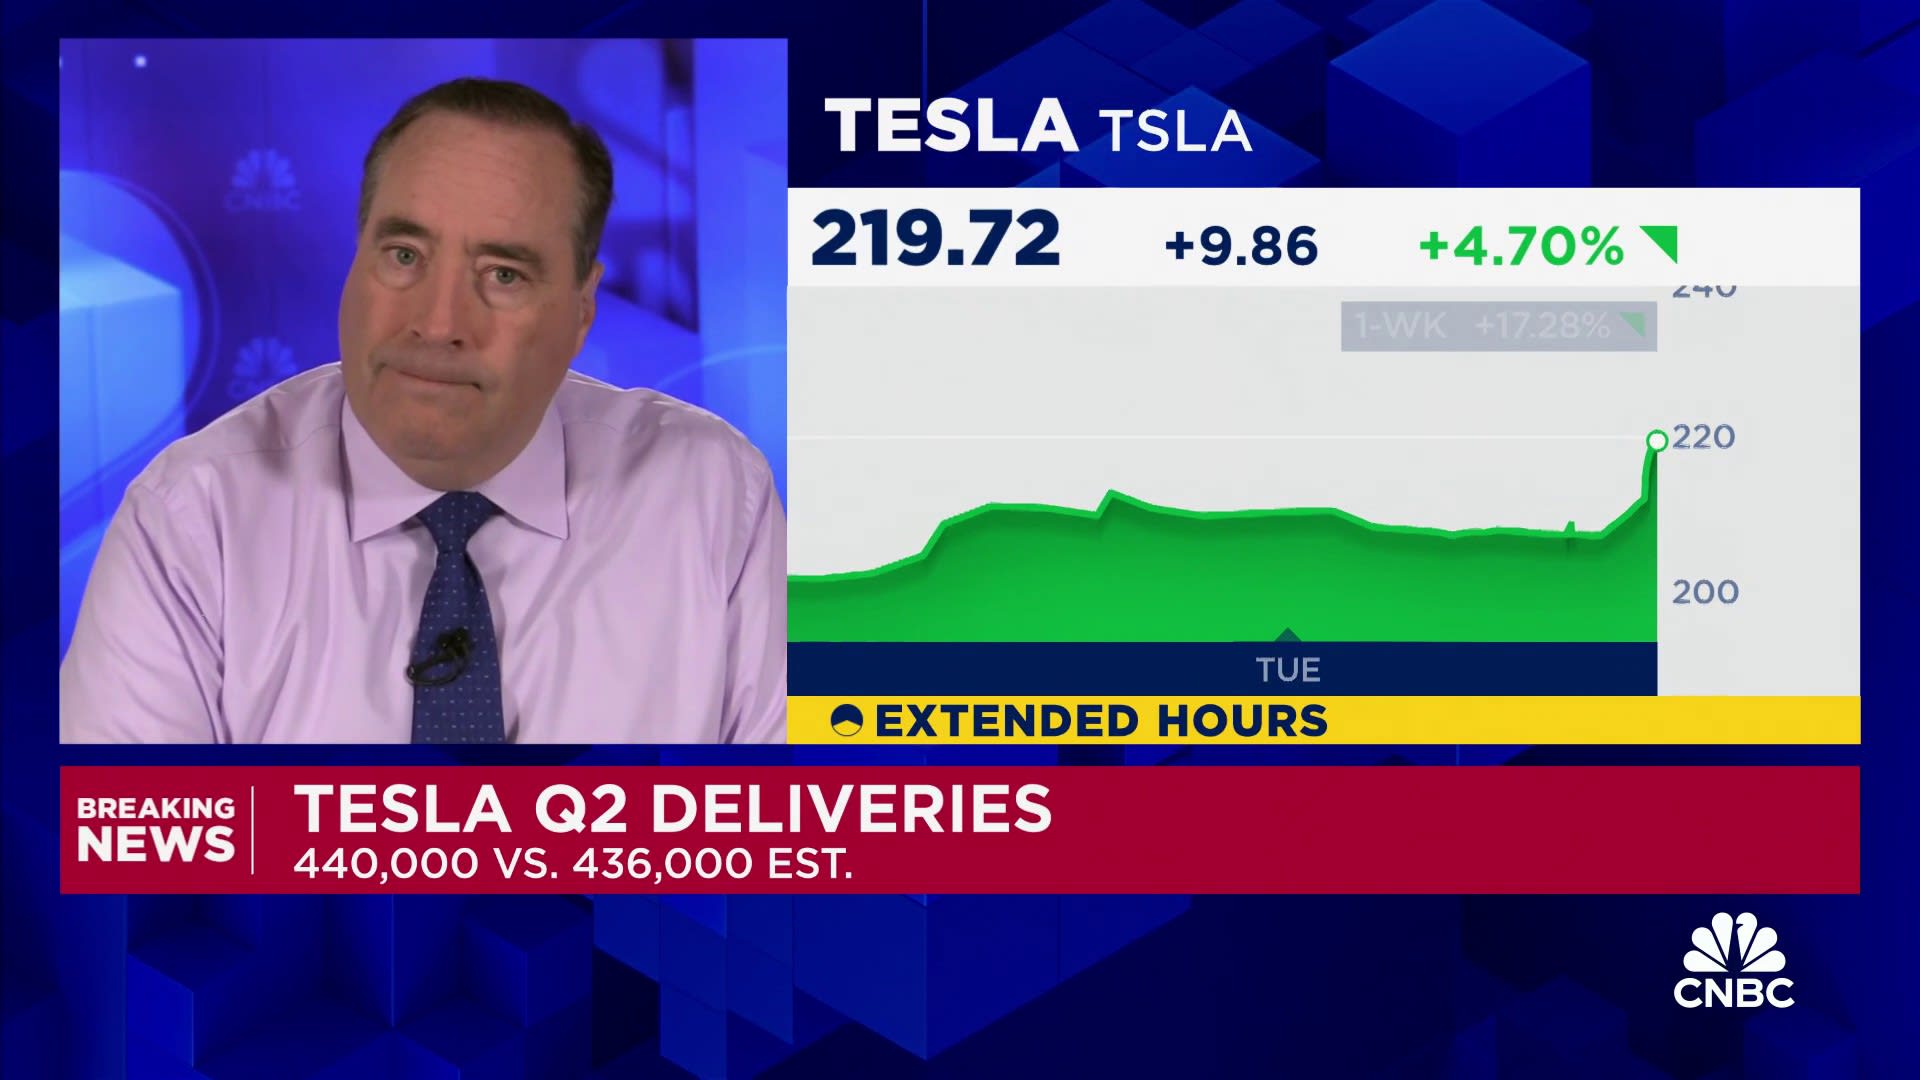 Tesla posts stronger-than-expected delivery numbers for Q2